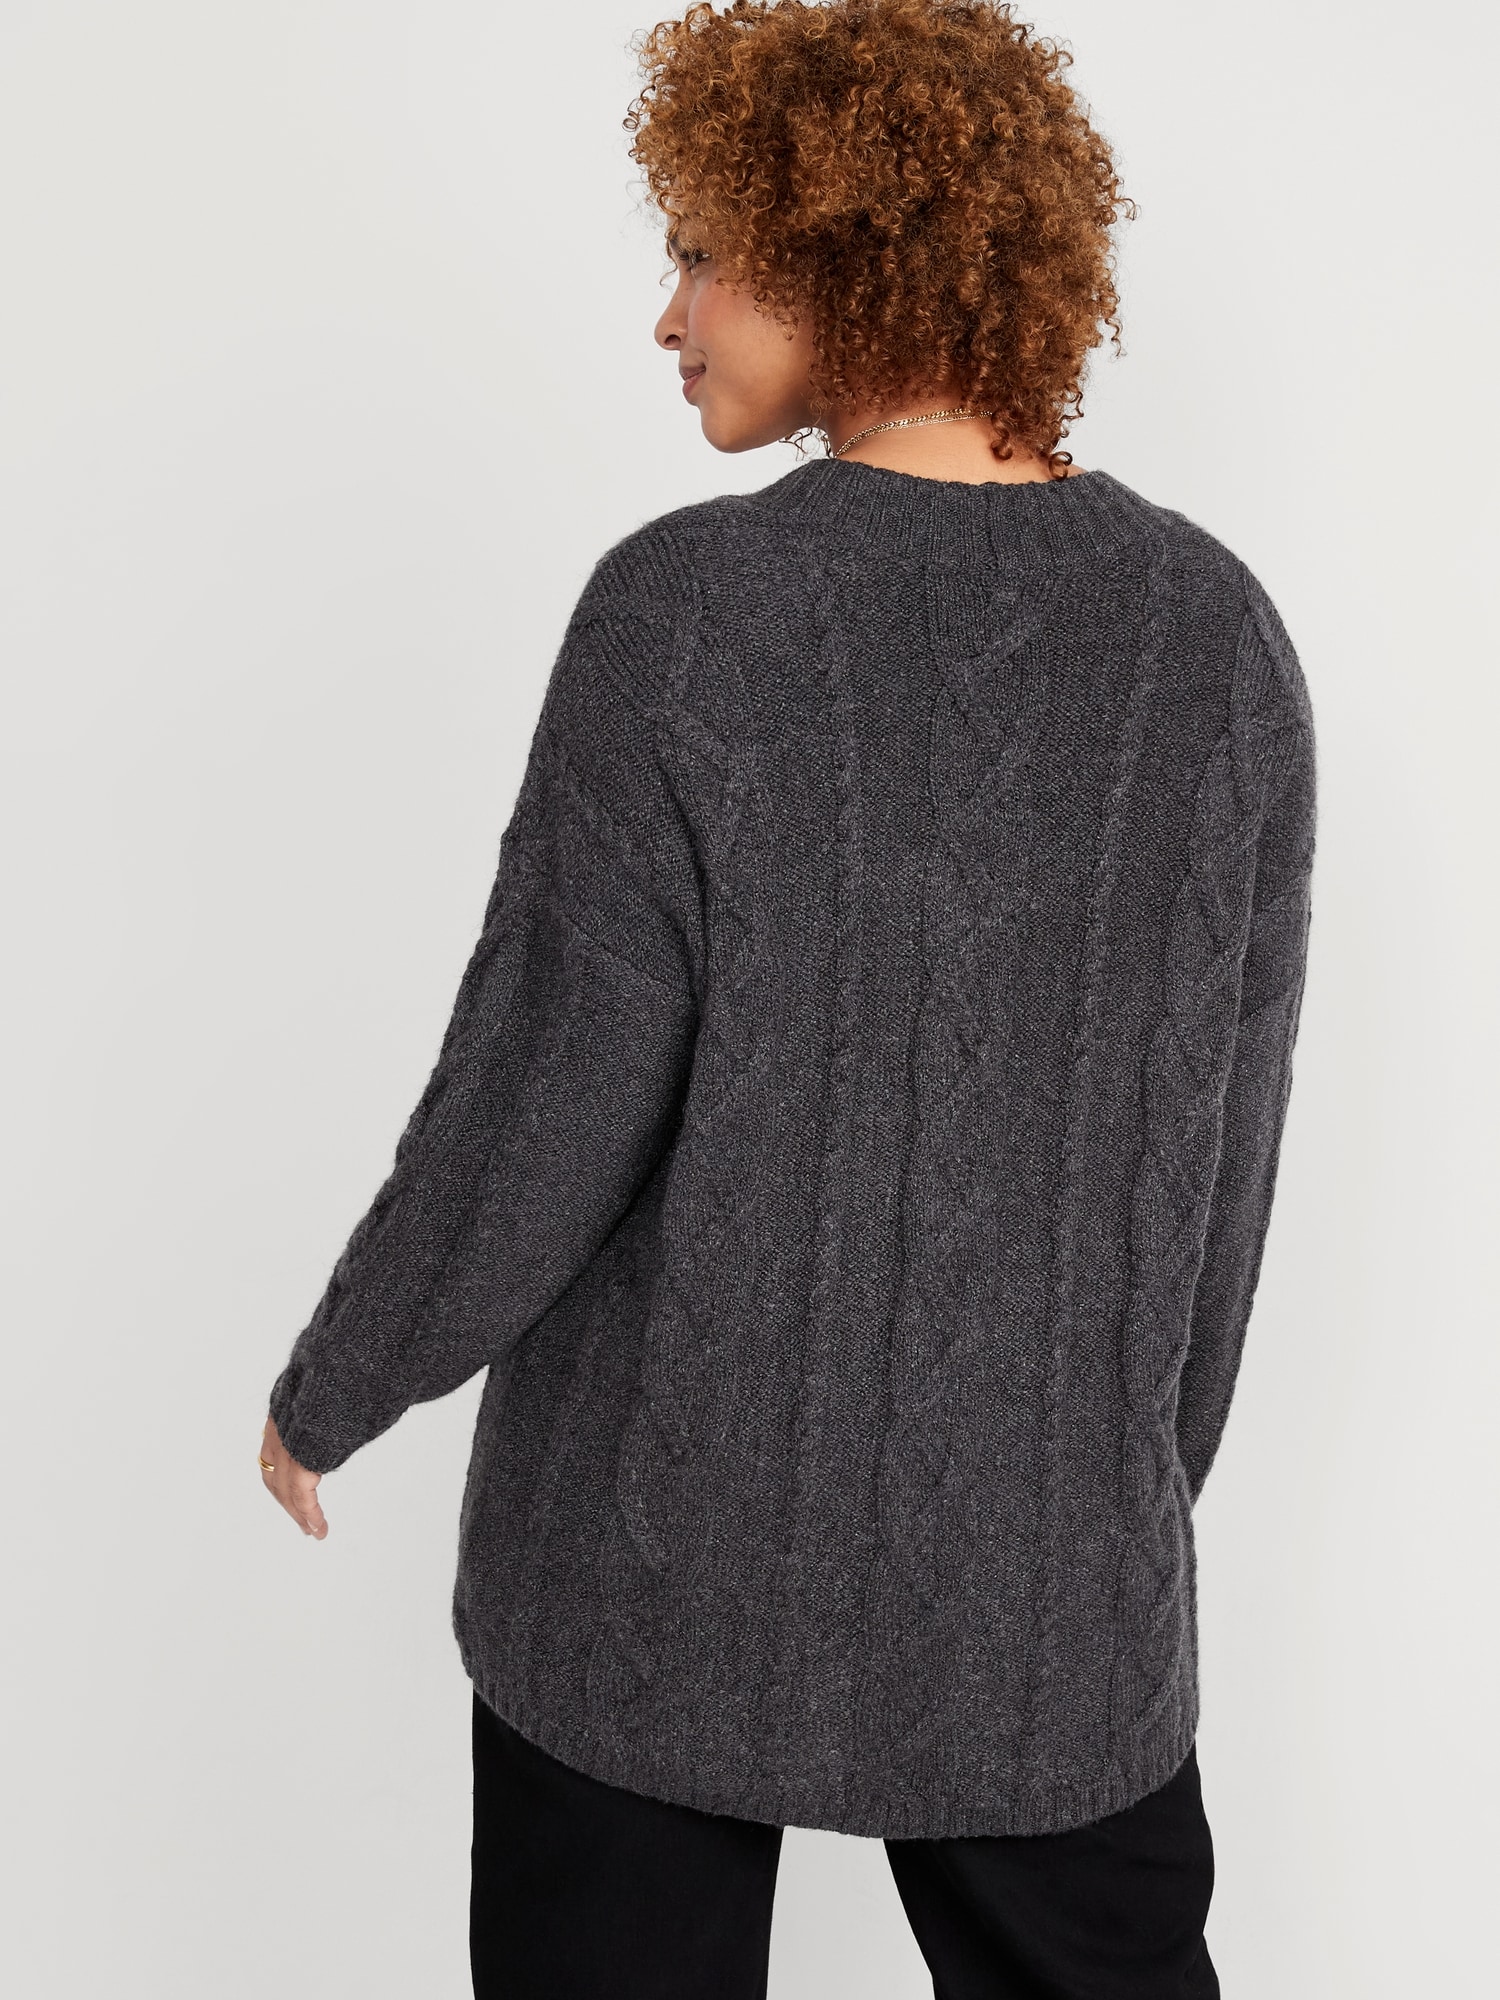 Oversized Chunky Cable-Knit Cardigan Sweater for | Old Navy Women